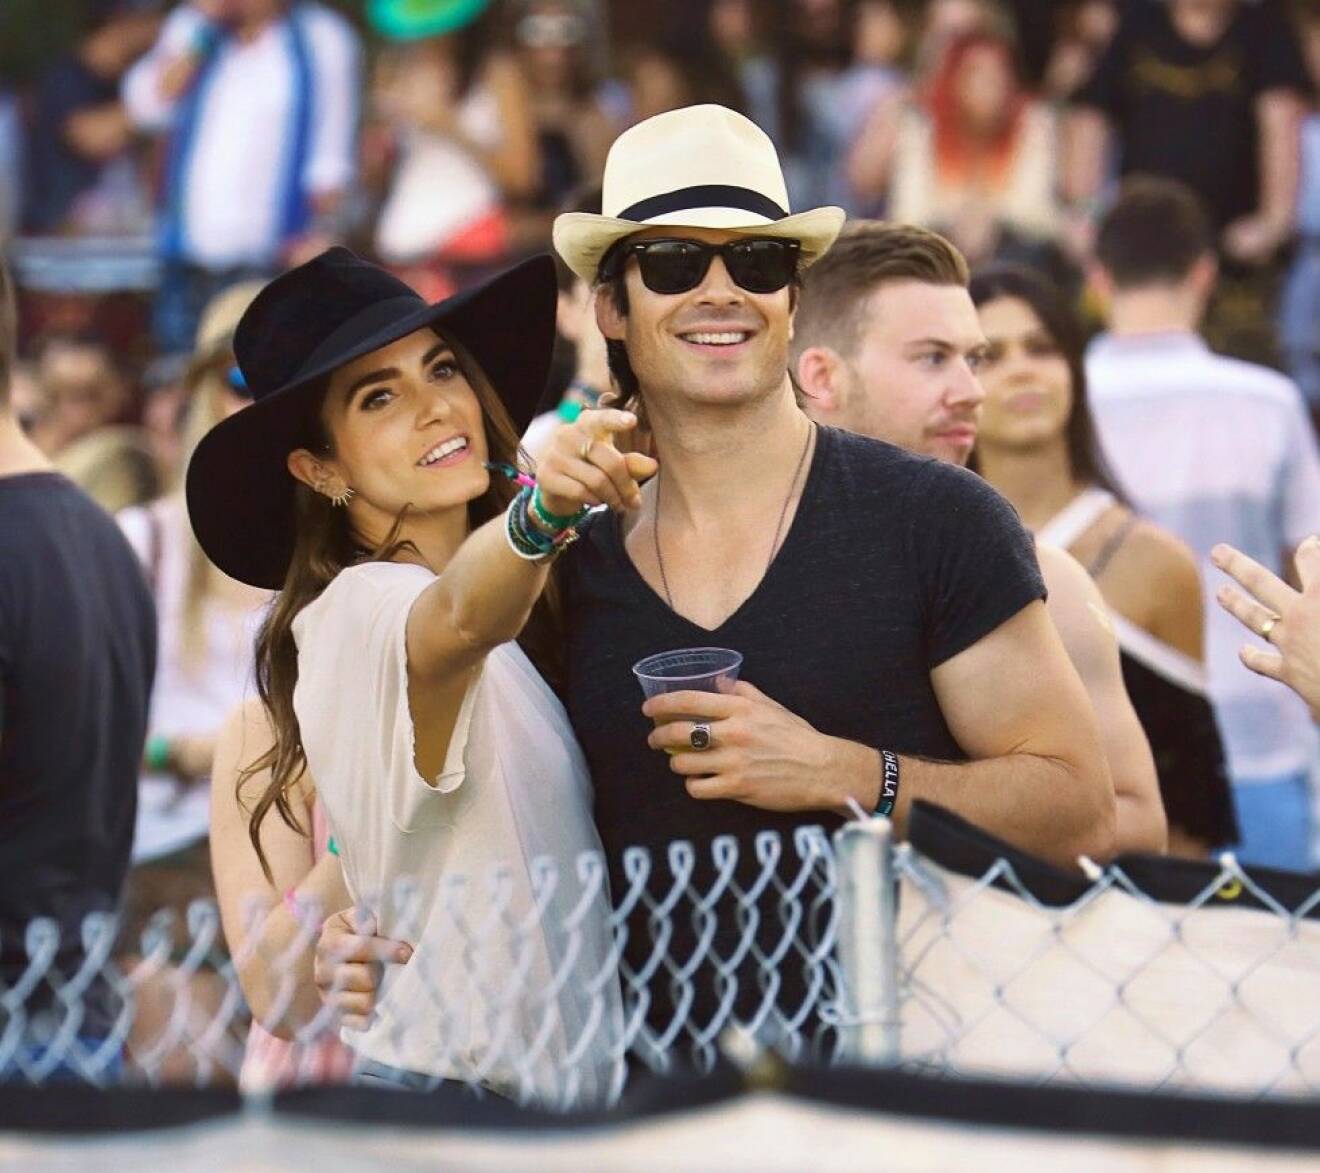 Nikki Reed and fiance' Ian Somerhalder kiss like crazy while watching a show at Coachella in Indio, CA.